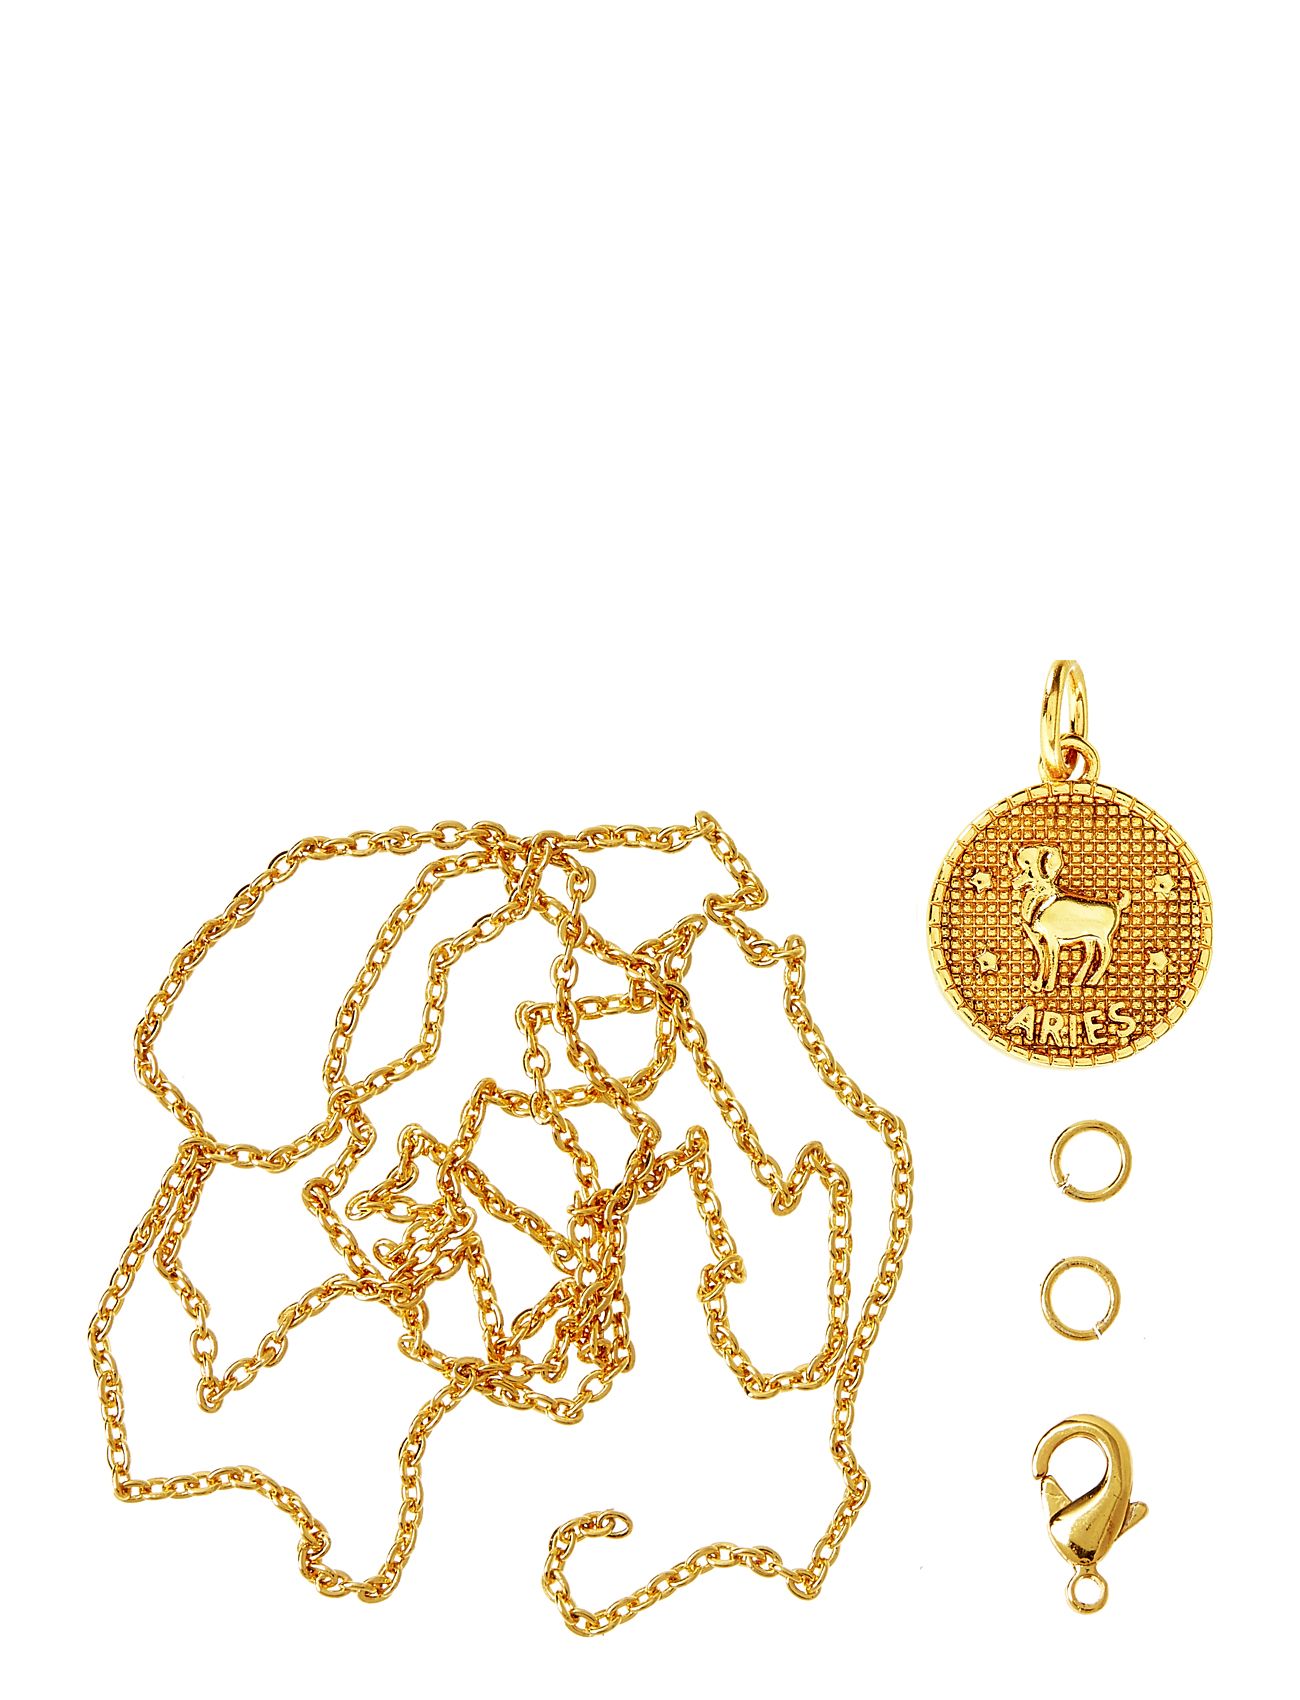 Zodiac Coin Pendant And Chain Set, Aries Toys Creativity Drawing & Crafts Craft Jewellery & Accessories Gold Me & My Box